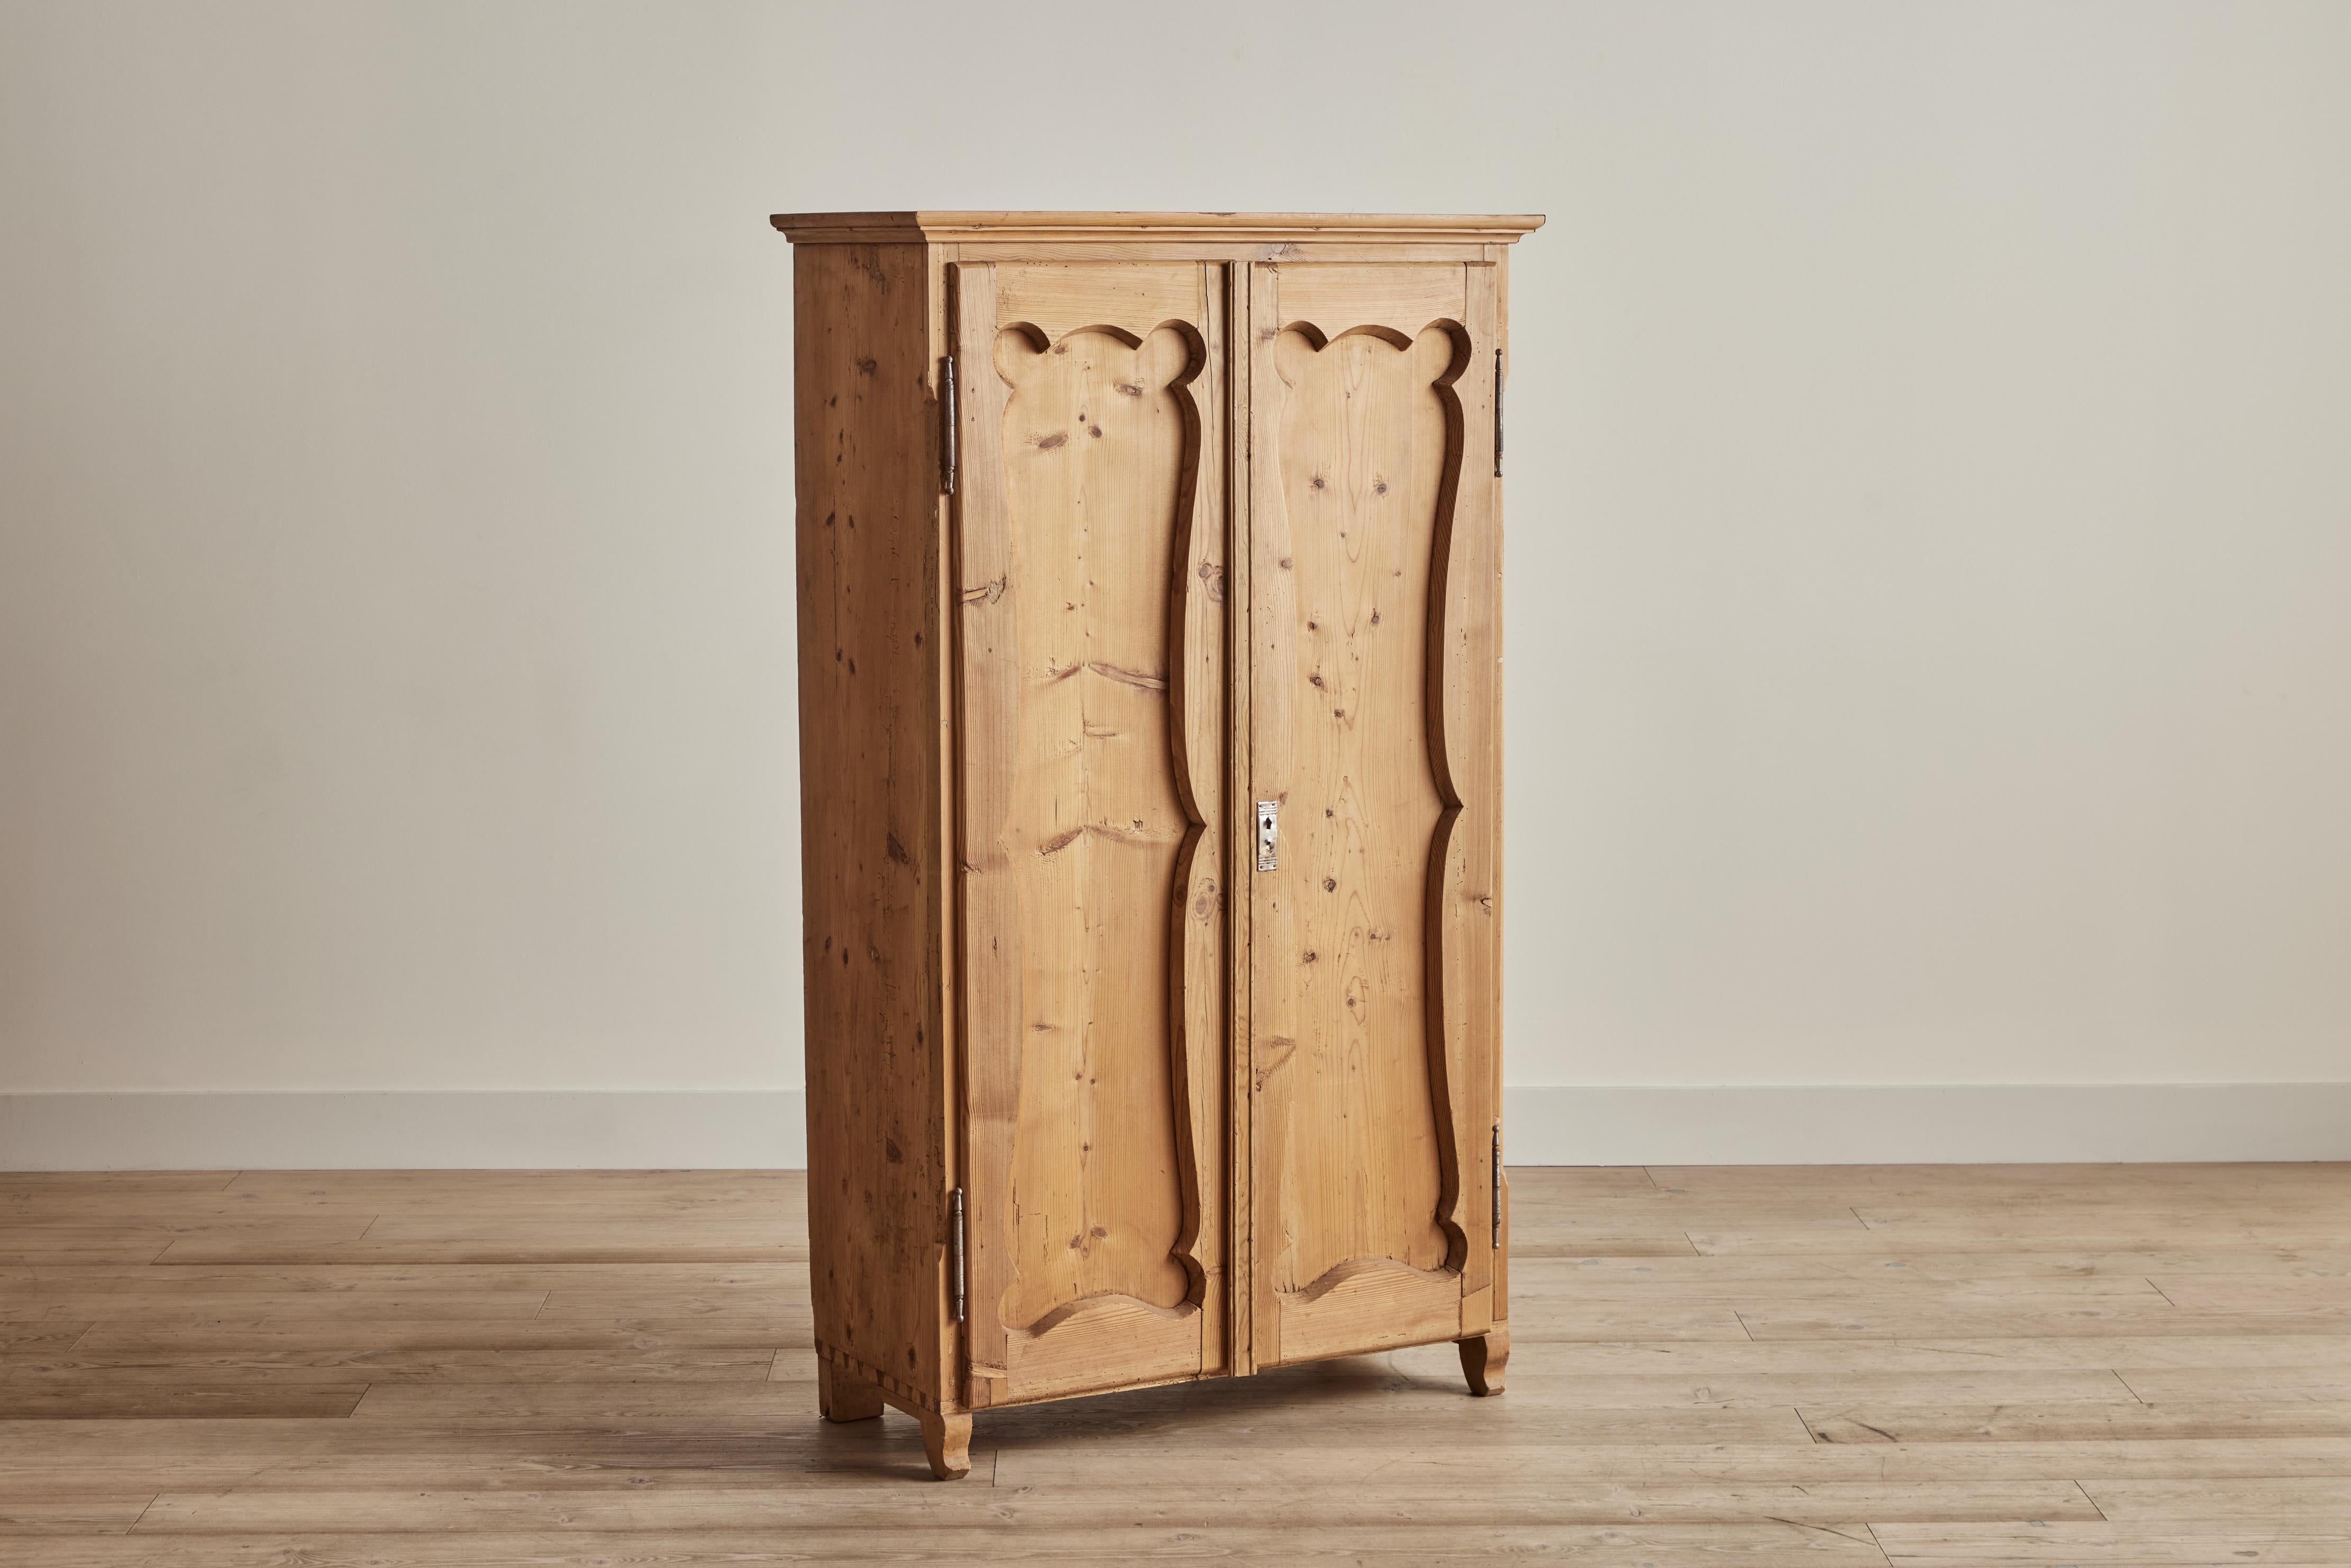 Nineteenth century pine wood armoire from France. This armoire has a petite footprint for clothing storage including a clothing rack inside and removable shelving. Cabinet comes with one key. Visible wear on wood is consistent with age and use.